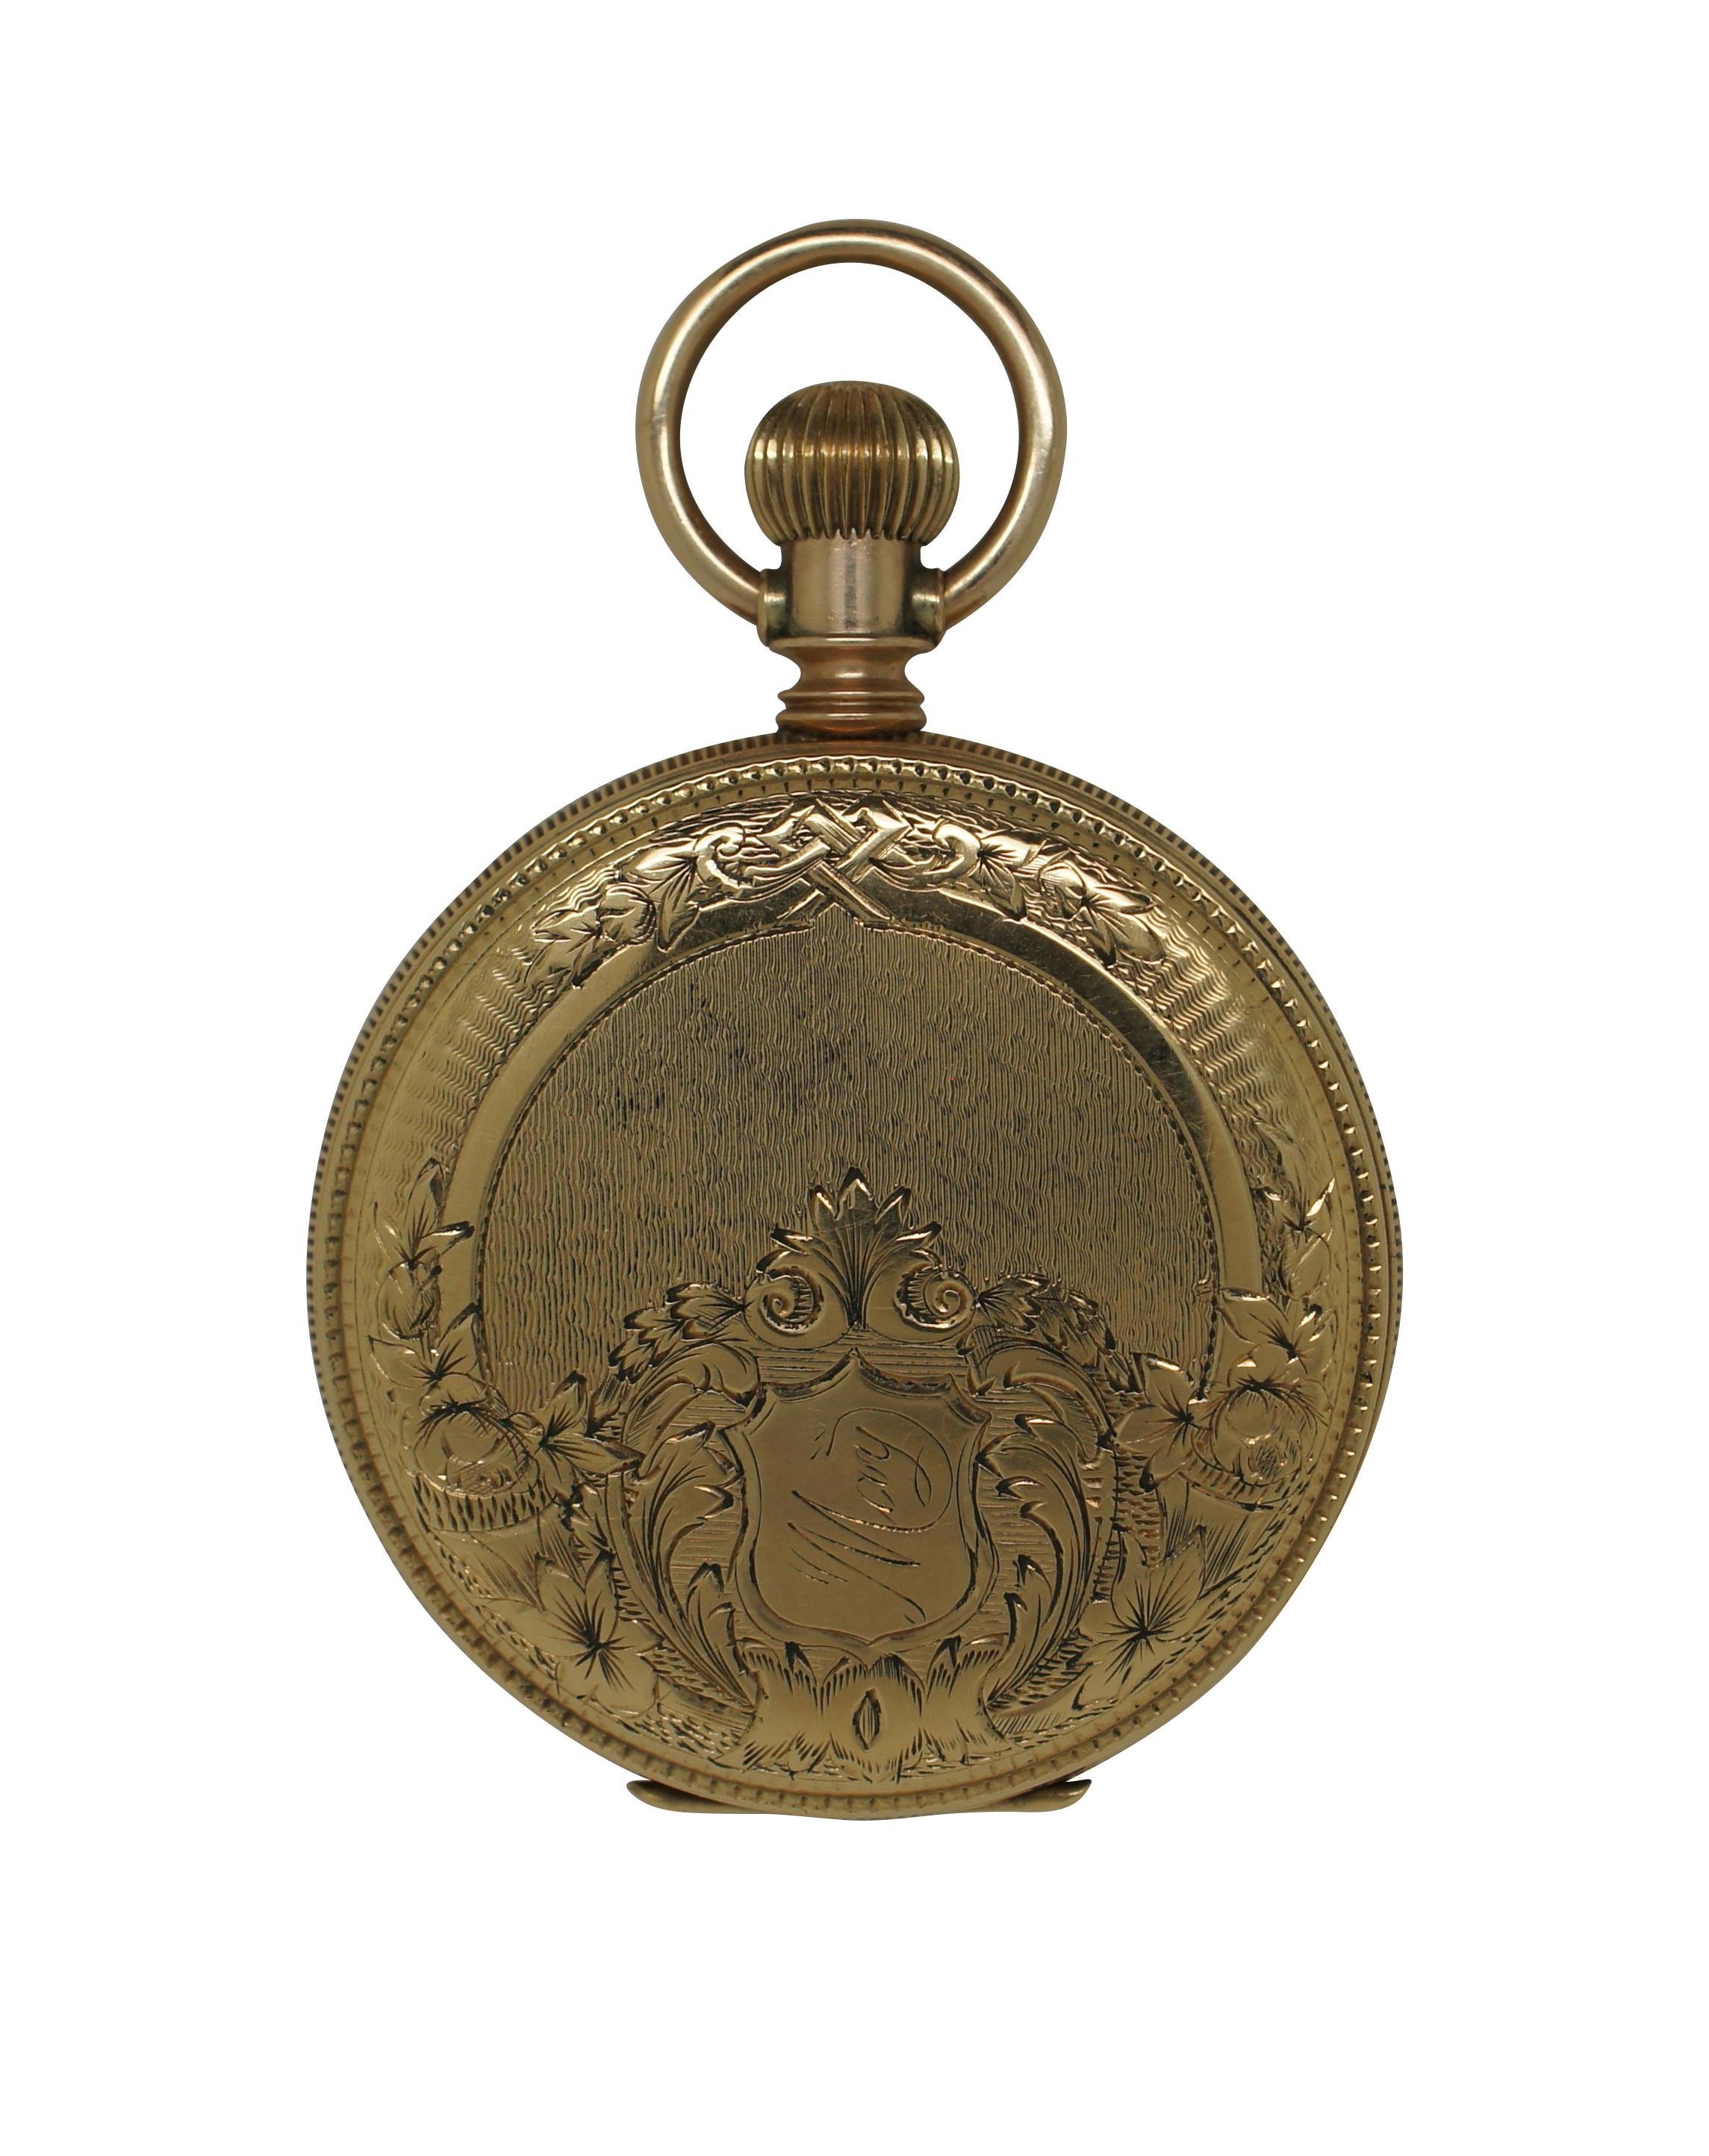 Antique late 1880’s pocket watch by Elgin National Watch Company. White porcelain face with black Roman numerals; second counting sub-dial with Arabic numerals. Case etched with an art nouveau foliate motif around a pair of rabbits on one side and